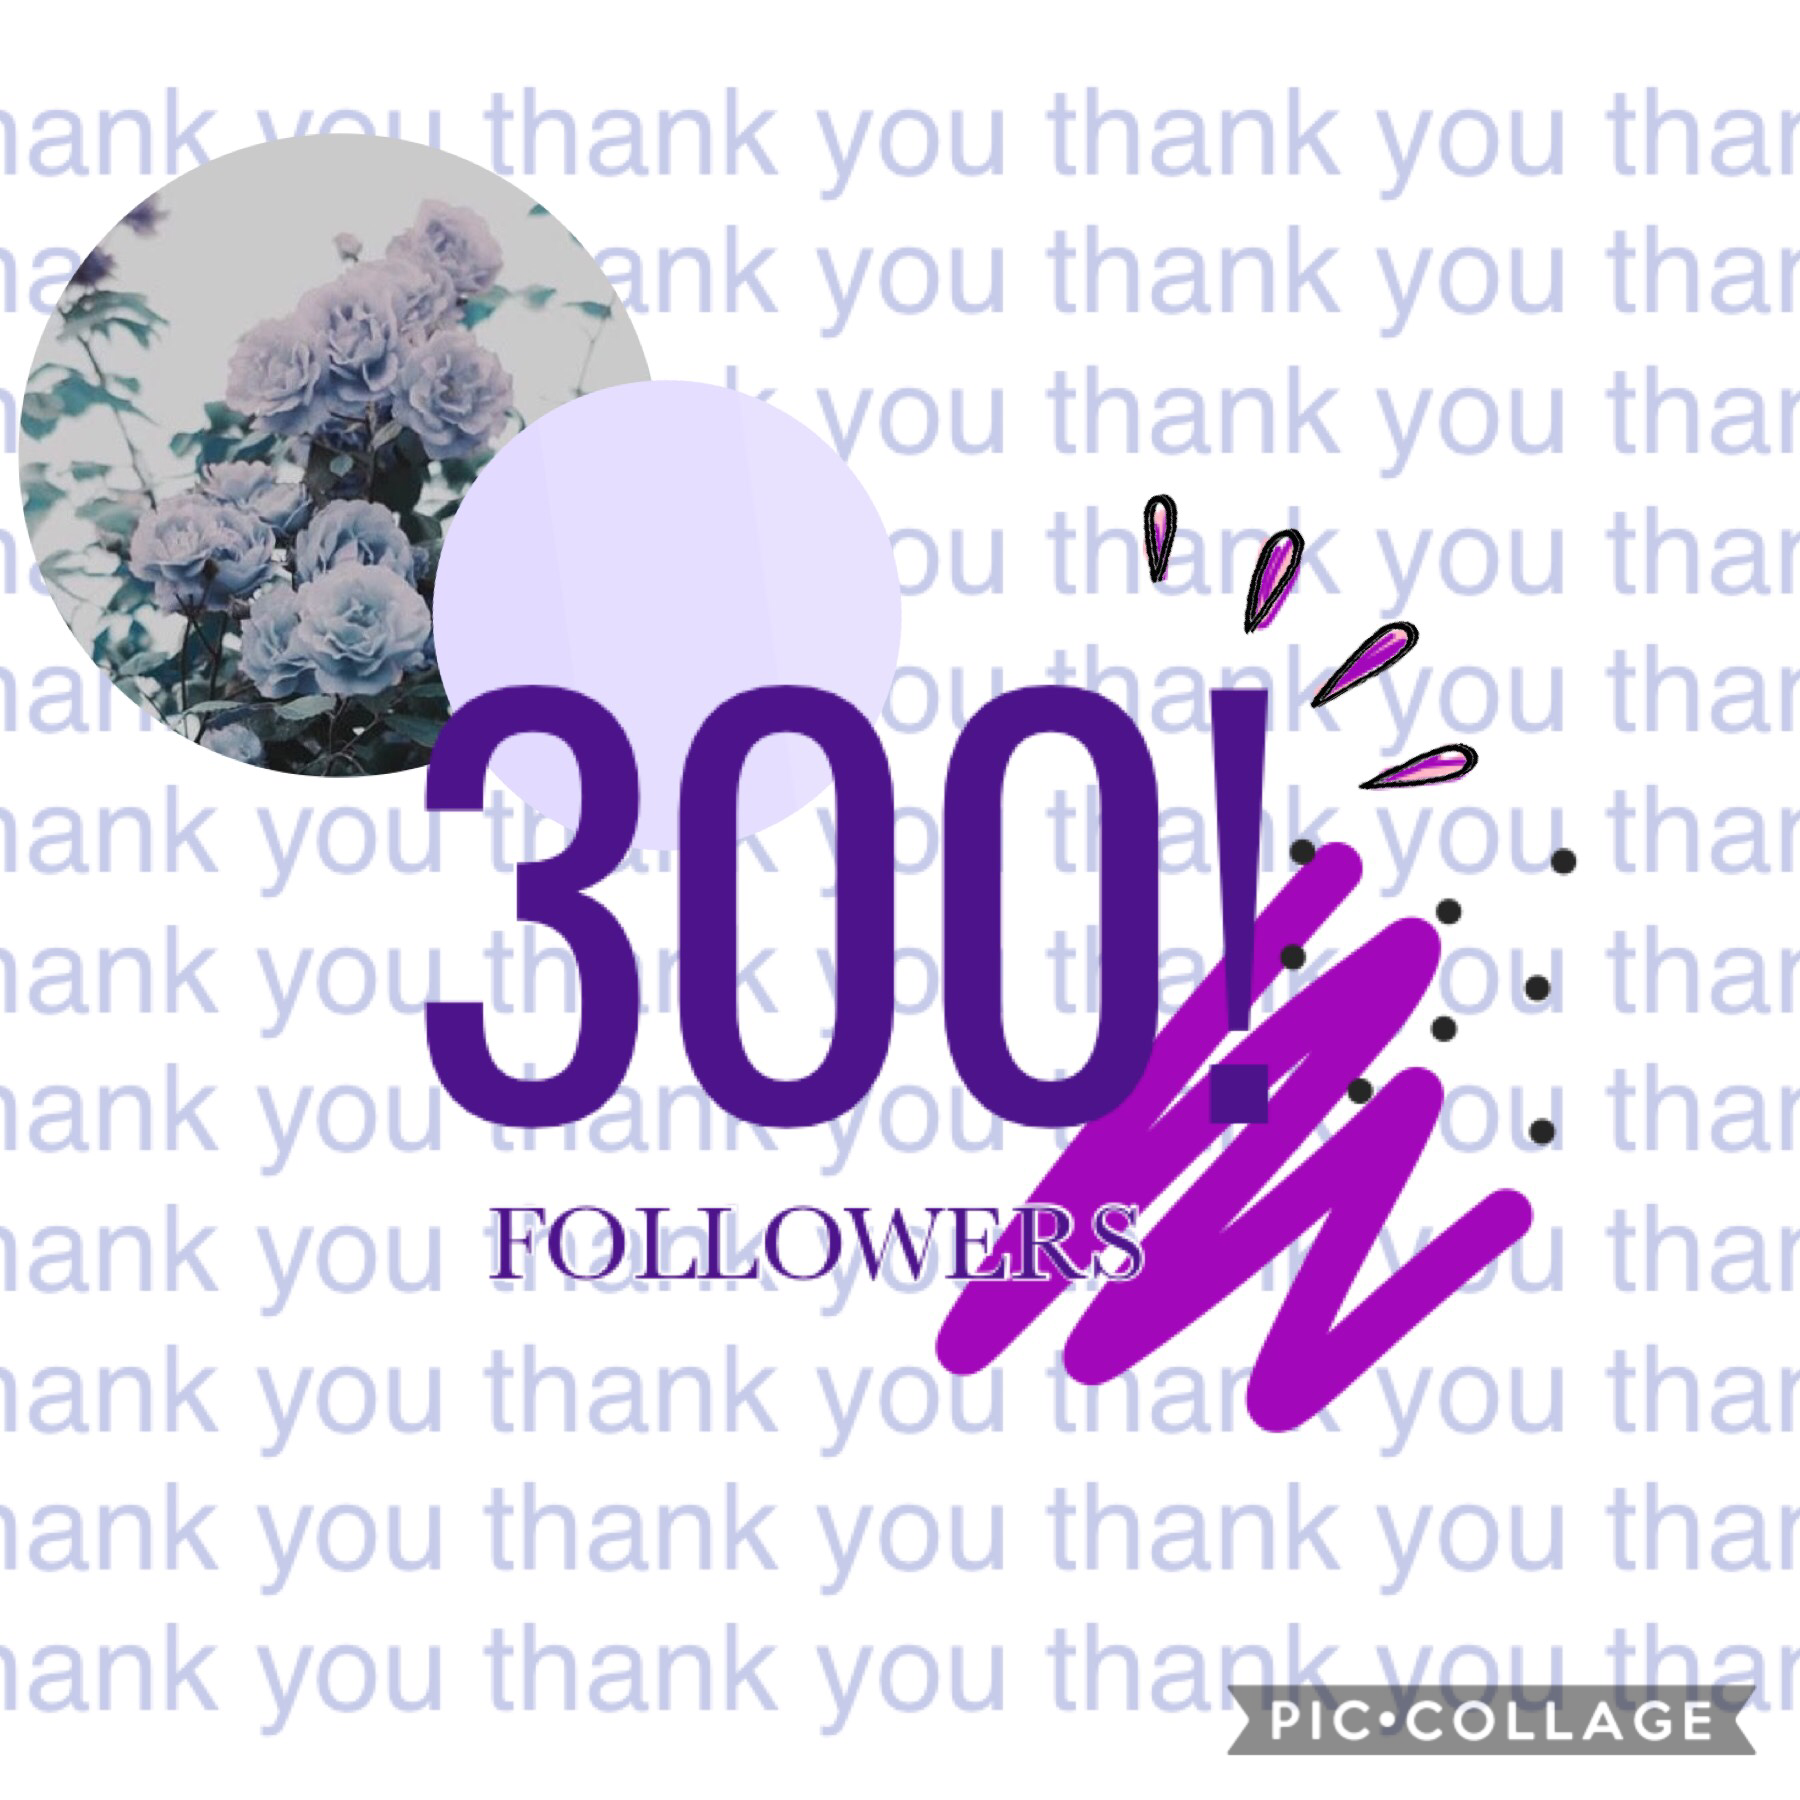 \(//∇//)\ tAp!

ThAnk yOu soOoOooOo mUch!!! I’m so sorry of being inactive but I’m going to begin posting more :,). ThAnK yOu aGaIn!!! 💜💜💜💜💜💜💜💜💜💜💜💜💜💜